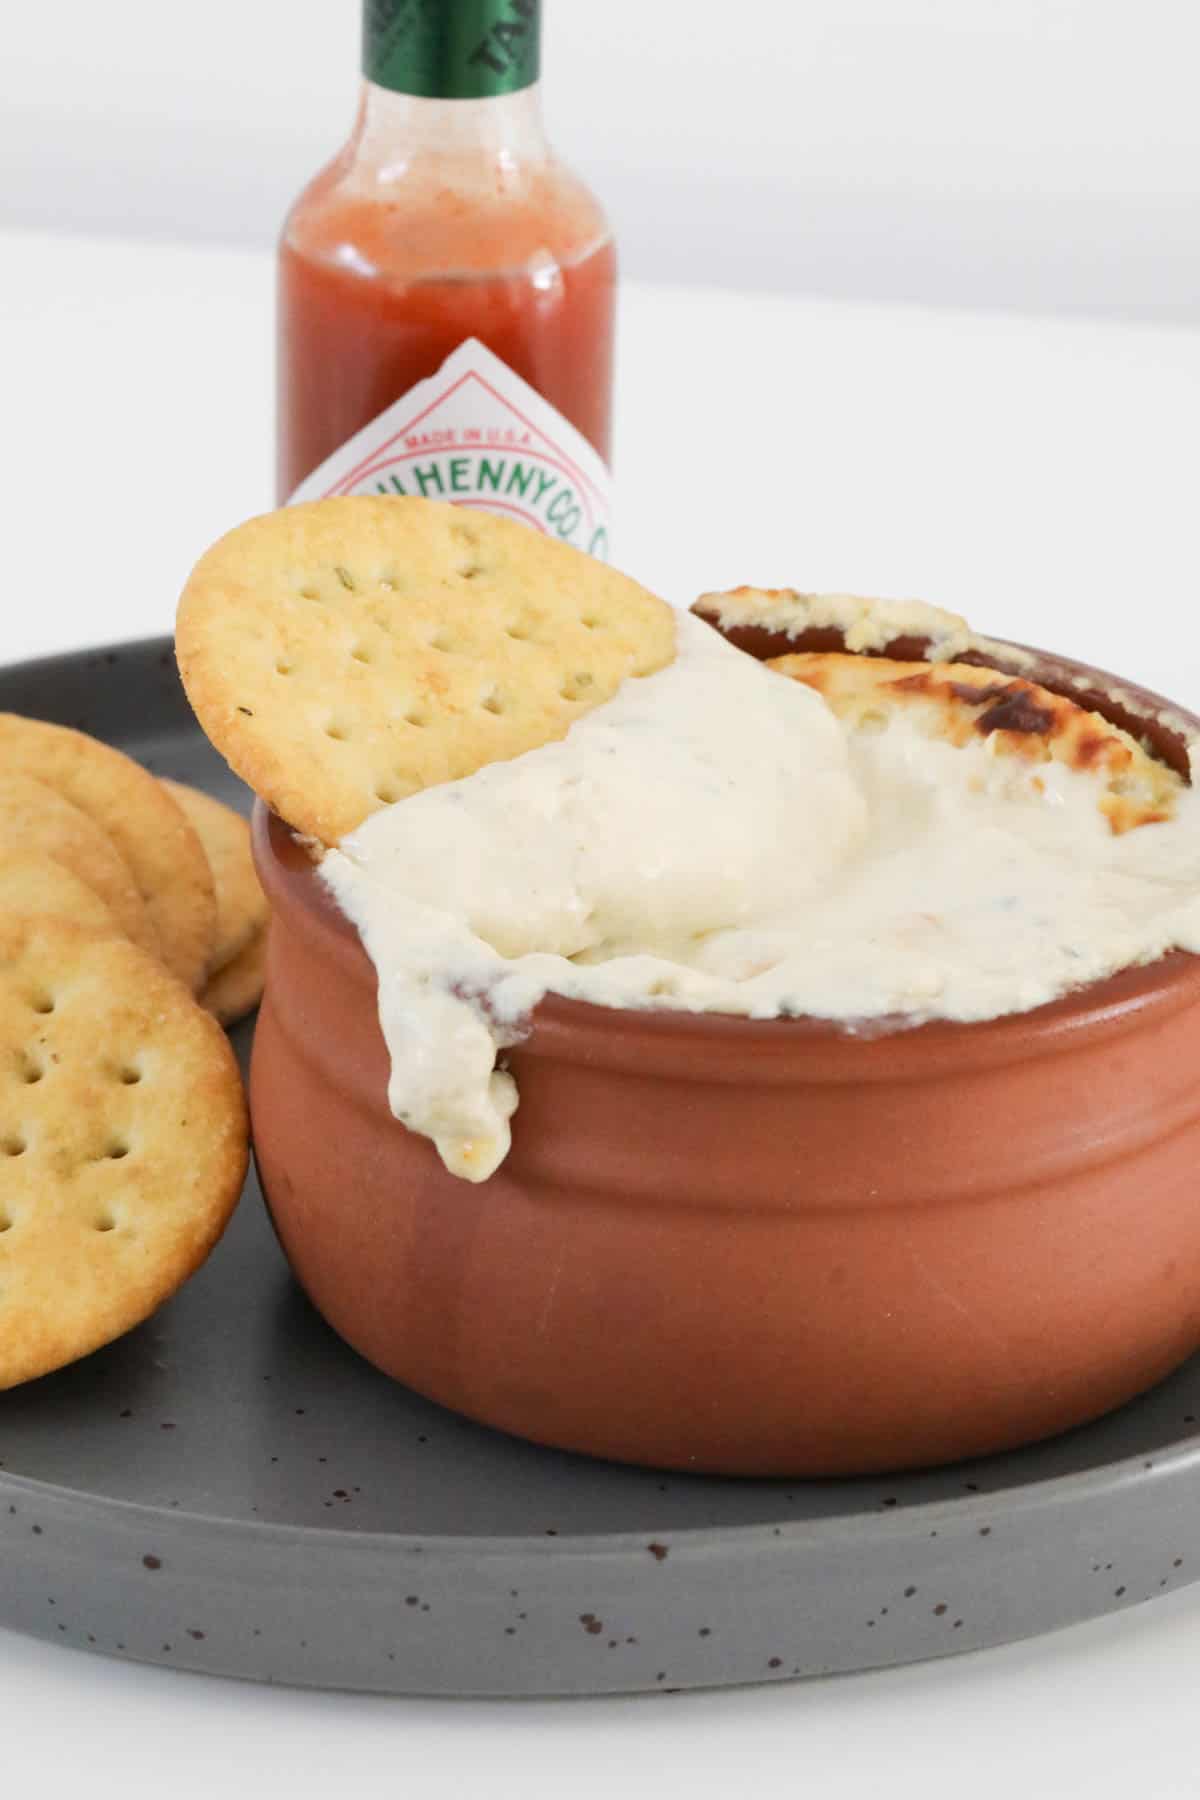 A small baking dish filled with blue cheese dip, with a cracker dipped in it.